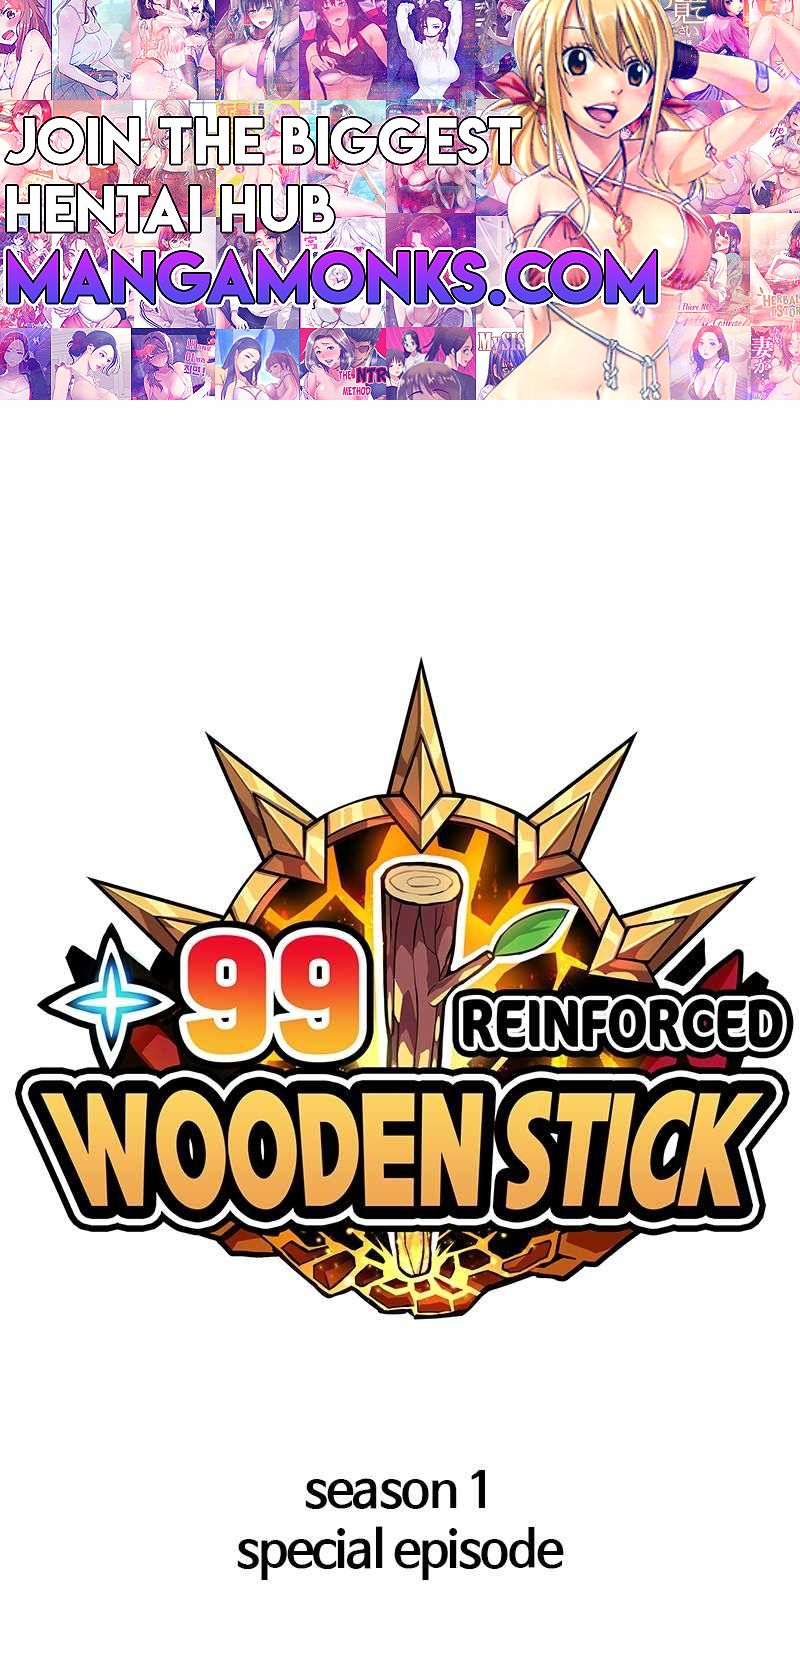 +99 Wooden stick Chapter 86